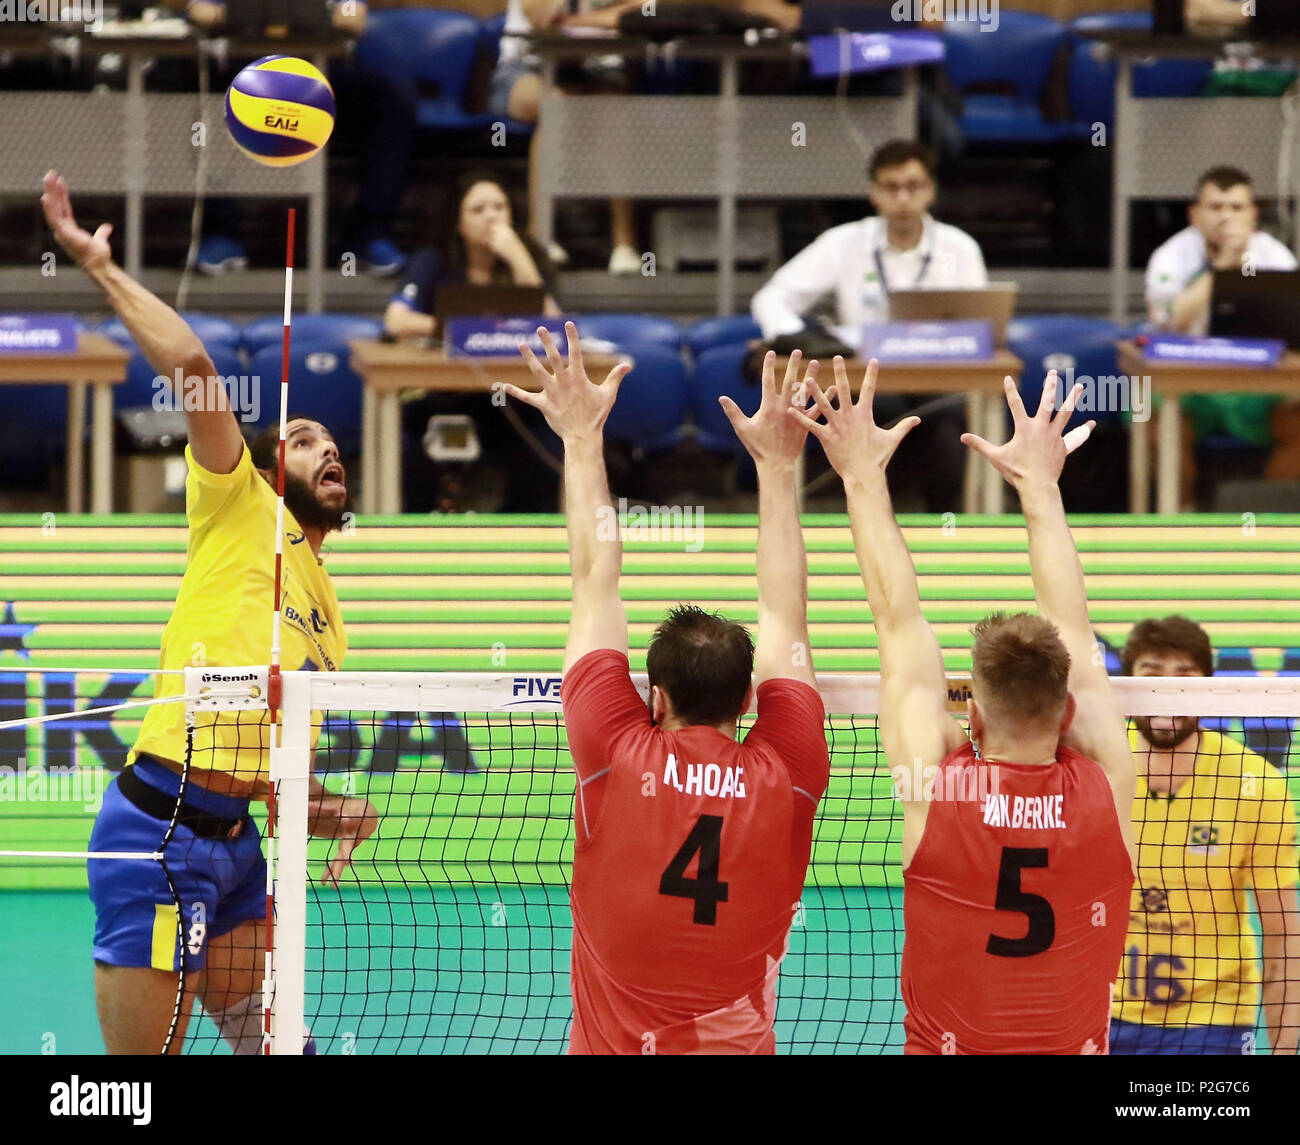 Varna, Bulgaria. 15th June, 2018. from left Wallace de SOUZA (Brazil), Nicholas HOAG (Canada), Lucas Van BERKEL (Canada), .mens Volleyball Nations League, week 4, Canada vs Brazil, Palace of culture and sport, Varna/Bulgaria, June 15, 2018, the fourth of 5 weekends of the preliminary lap in the new established mens Volleyball Nationas League takes place in Varna/Bulgaria. Credit: Wolfgang Fehrmann/ZUMA Wire/Alamy Live News Stock Photo